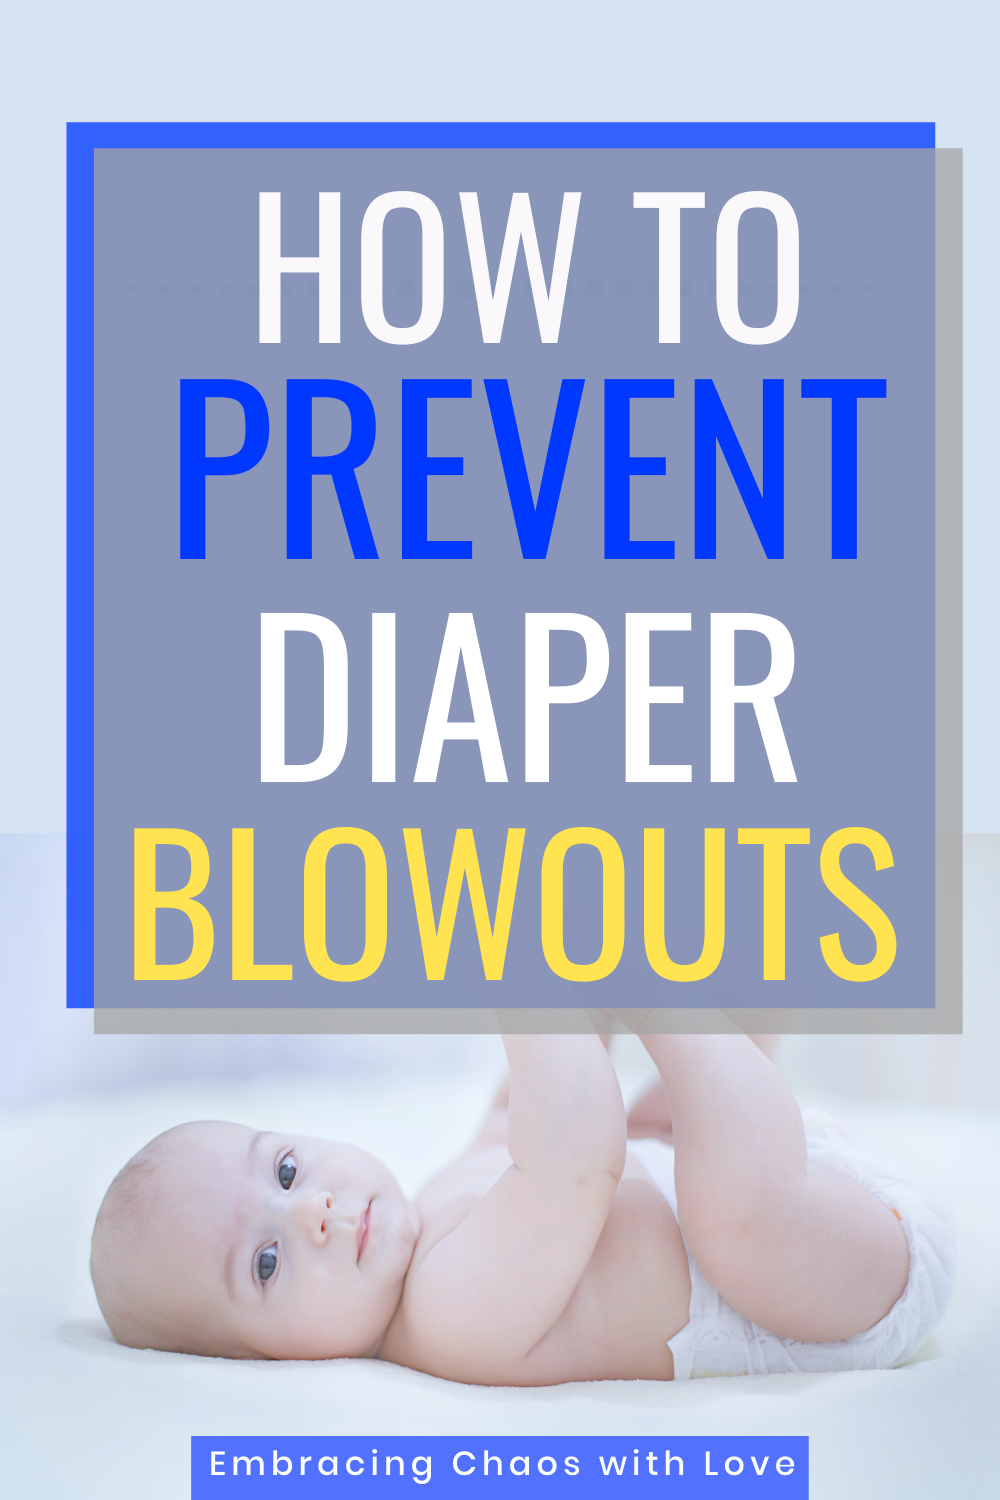 Helpful Tips on How to Prevent Diaper Blowouts